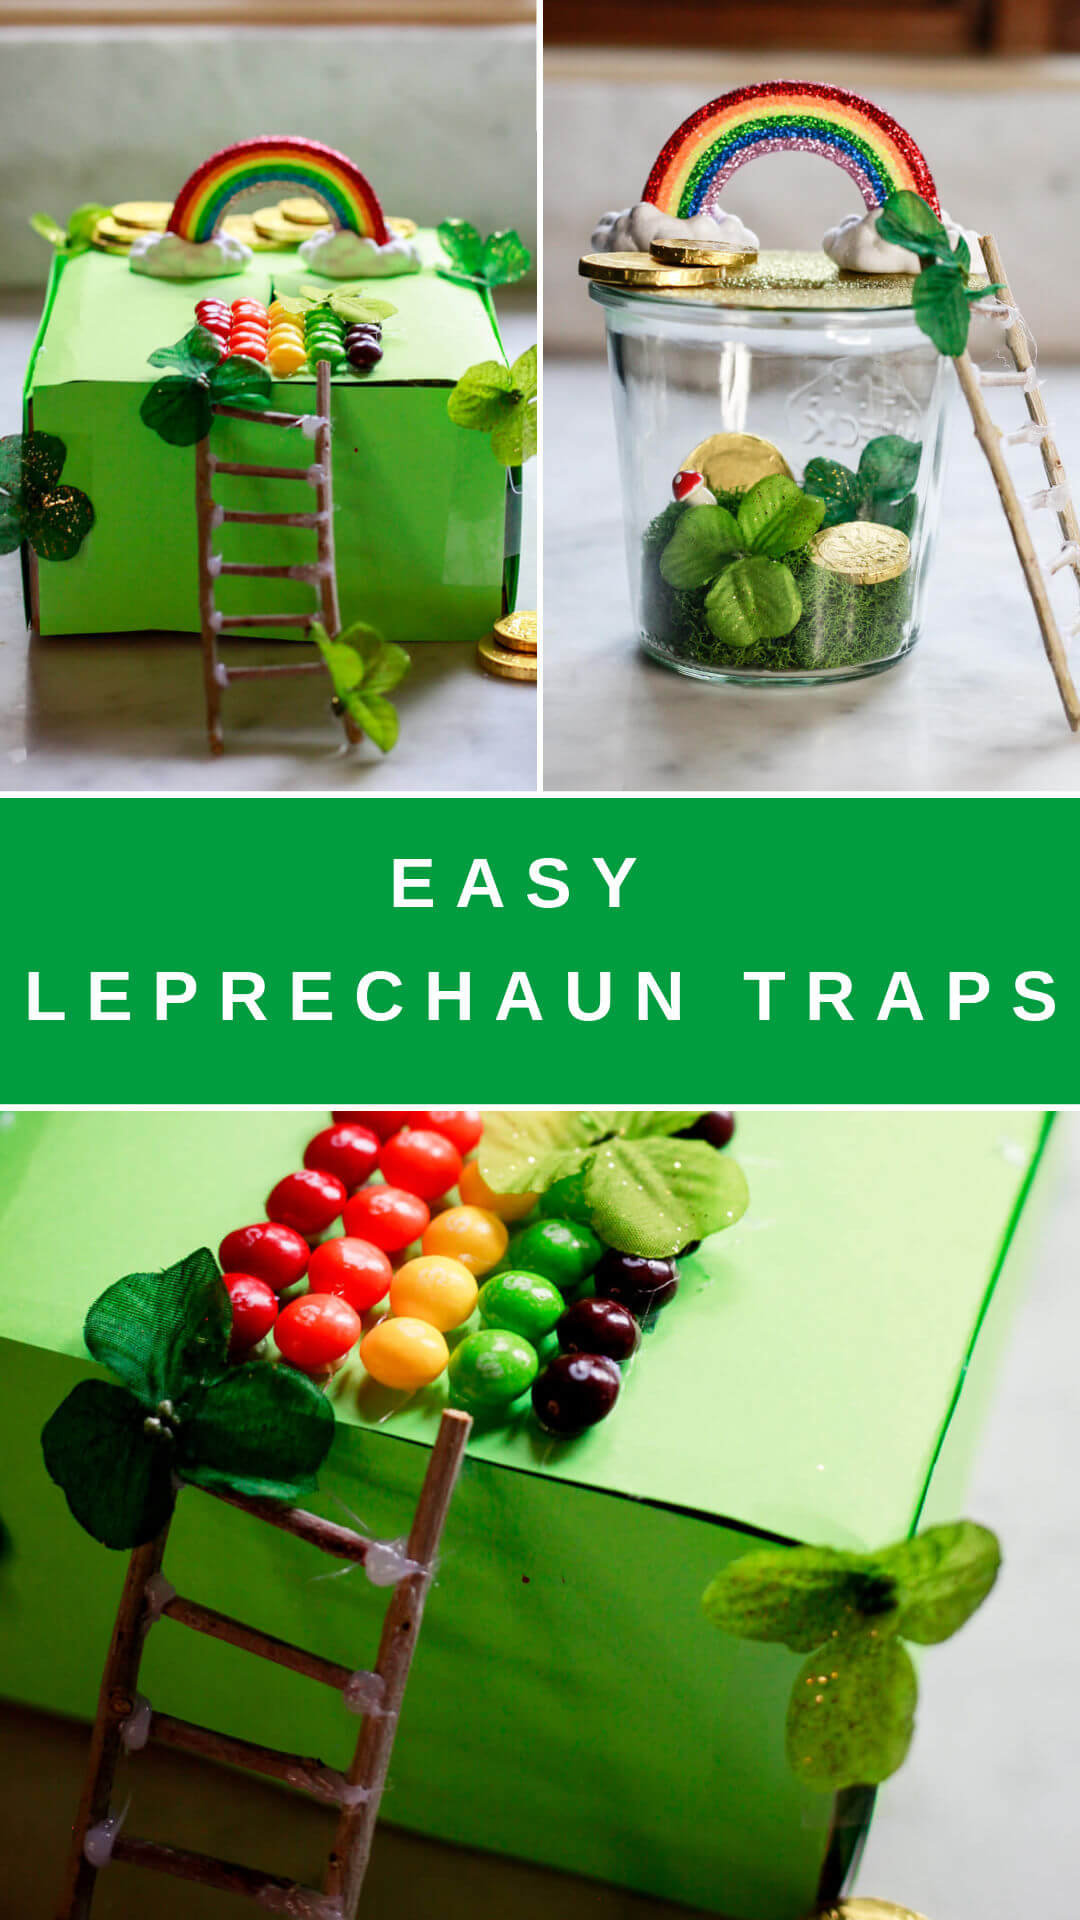 Cute and easy leprechaun trap ideas. A collage of three leprechaun traps (shoe box and mason jar) with text overlay that reads "easy leprechaun traps"